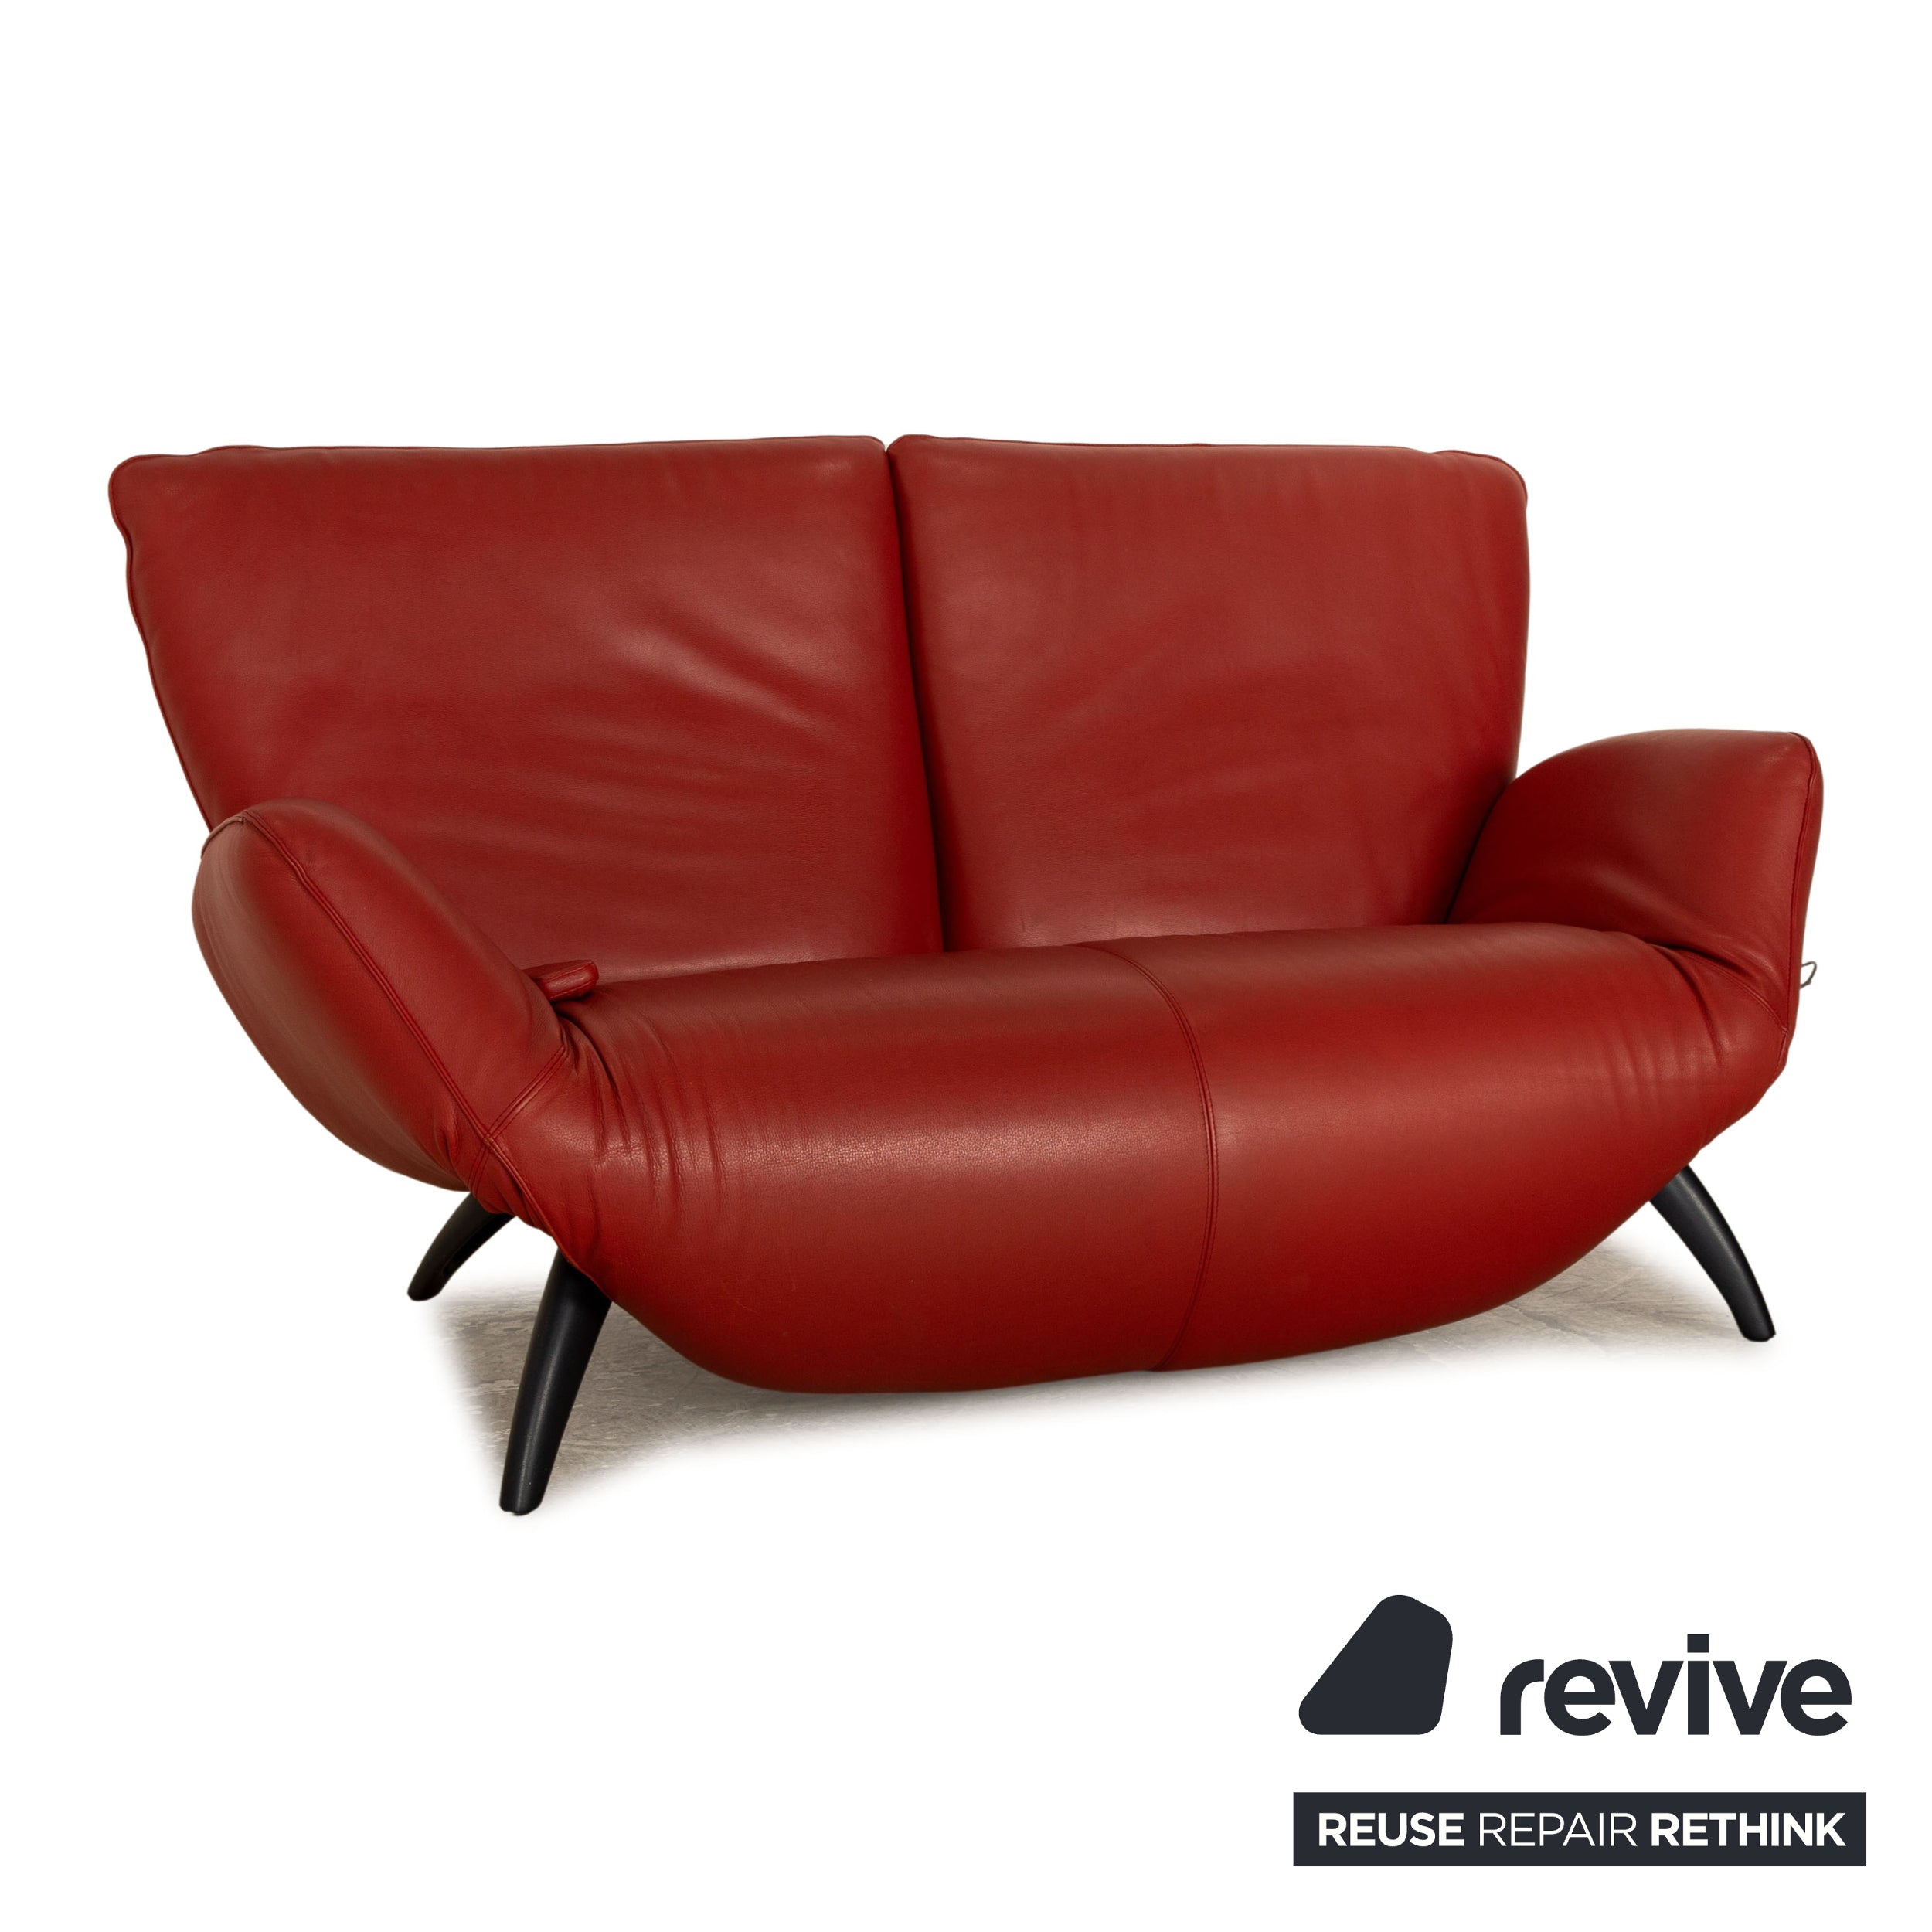 Leolux Panta Rhei Leather Two-Seater Red Sofa Couch Electric Function